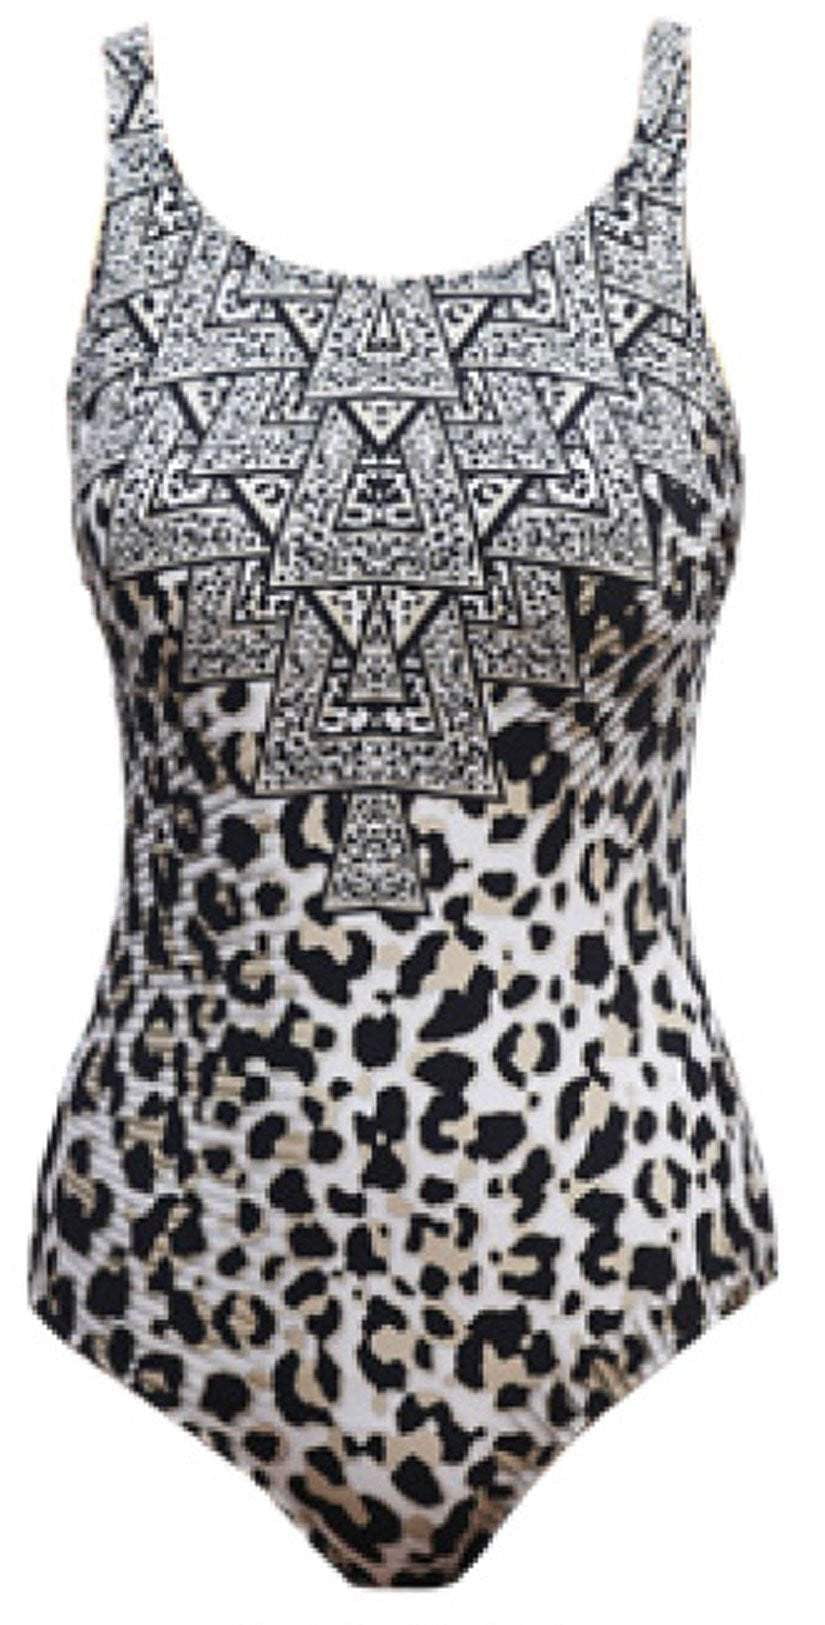 Jamu One Piece Post Mastectomy Swimsuit. Blk and White Print. New with Tags